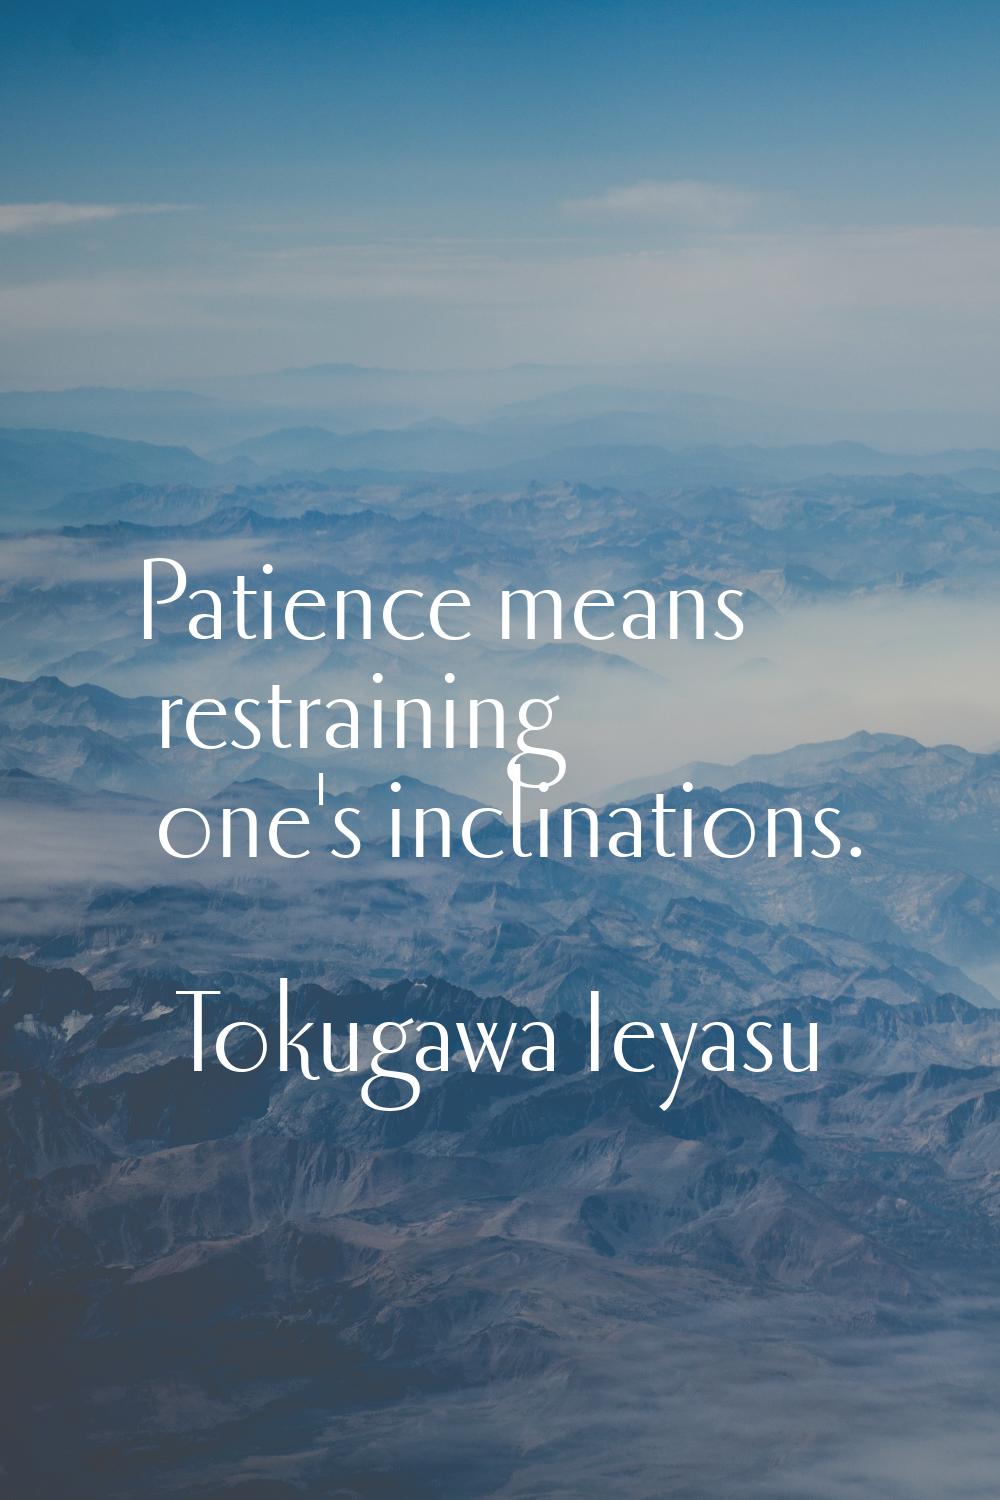 Patience means restraining one's inclinations.